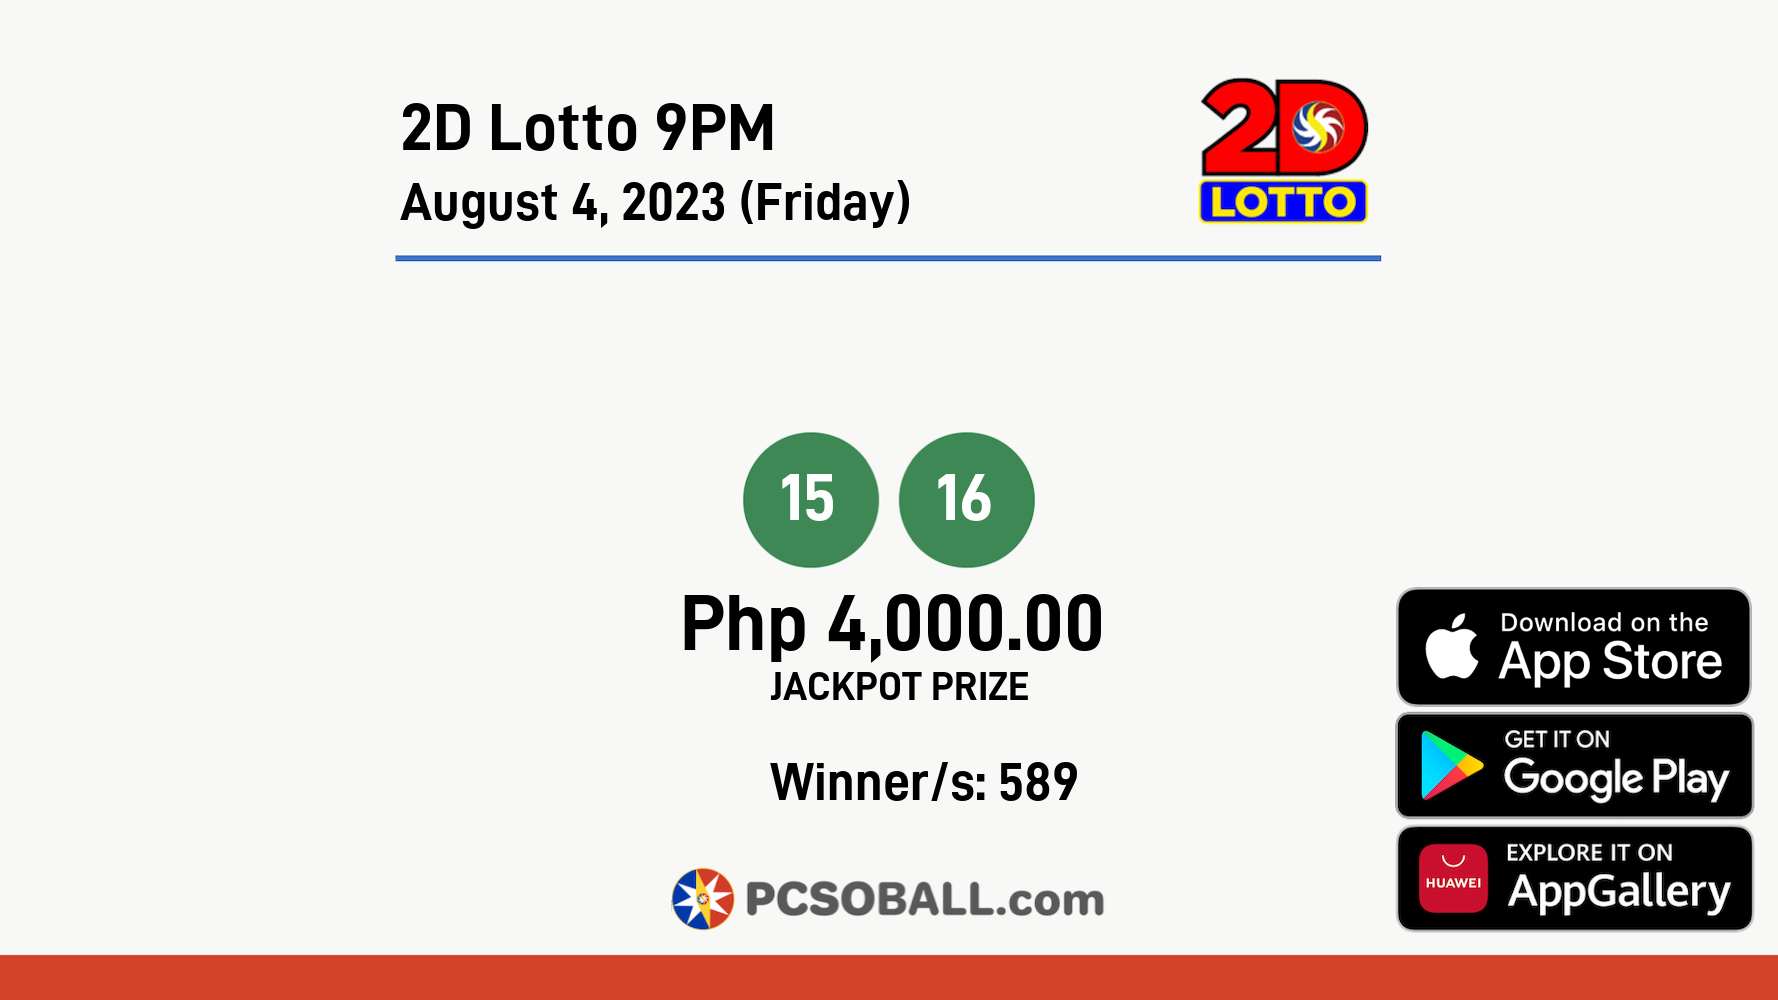 2D Lotto 9PM August 4, 2023 (Friday) Result